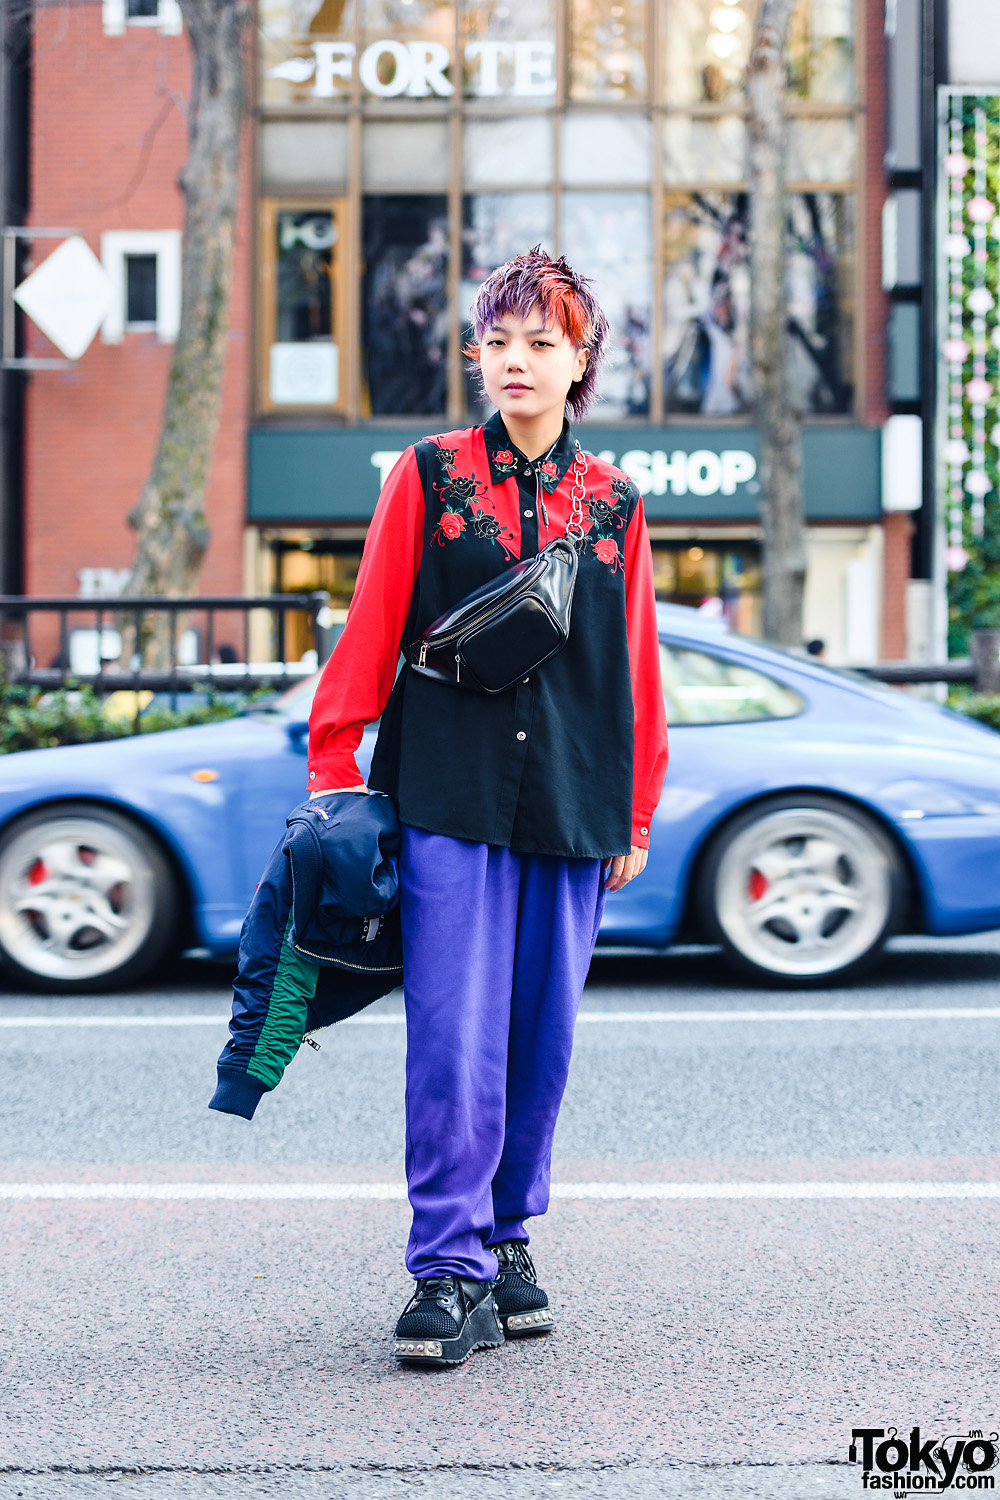 Harajuku Street Style w/ Colorful Pixie Hair, Leather Waist Bag, Tommy Hilfiger Bomber Jacket, Resale Fashion & Mesh Boots